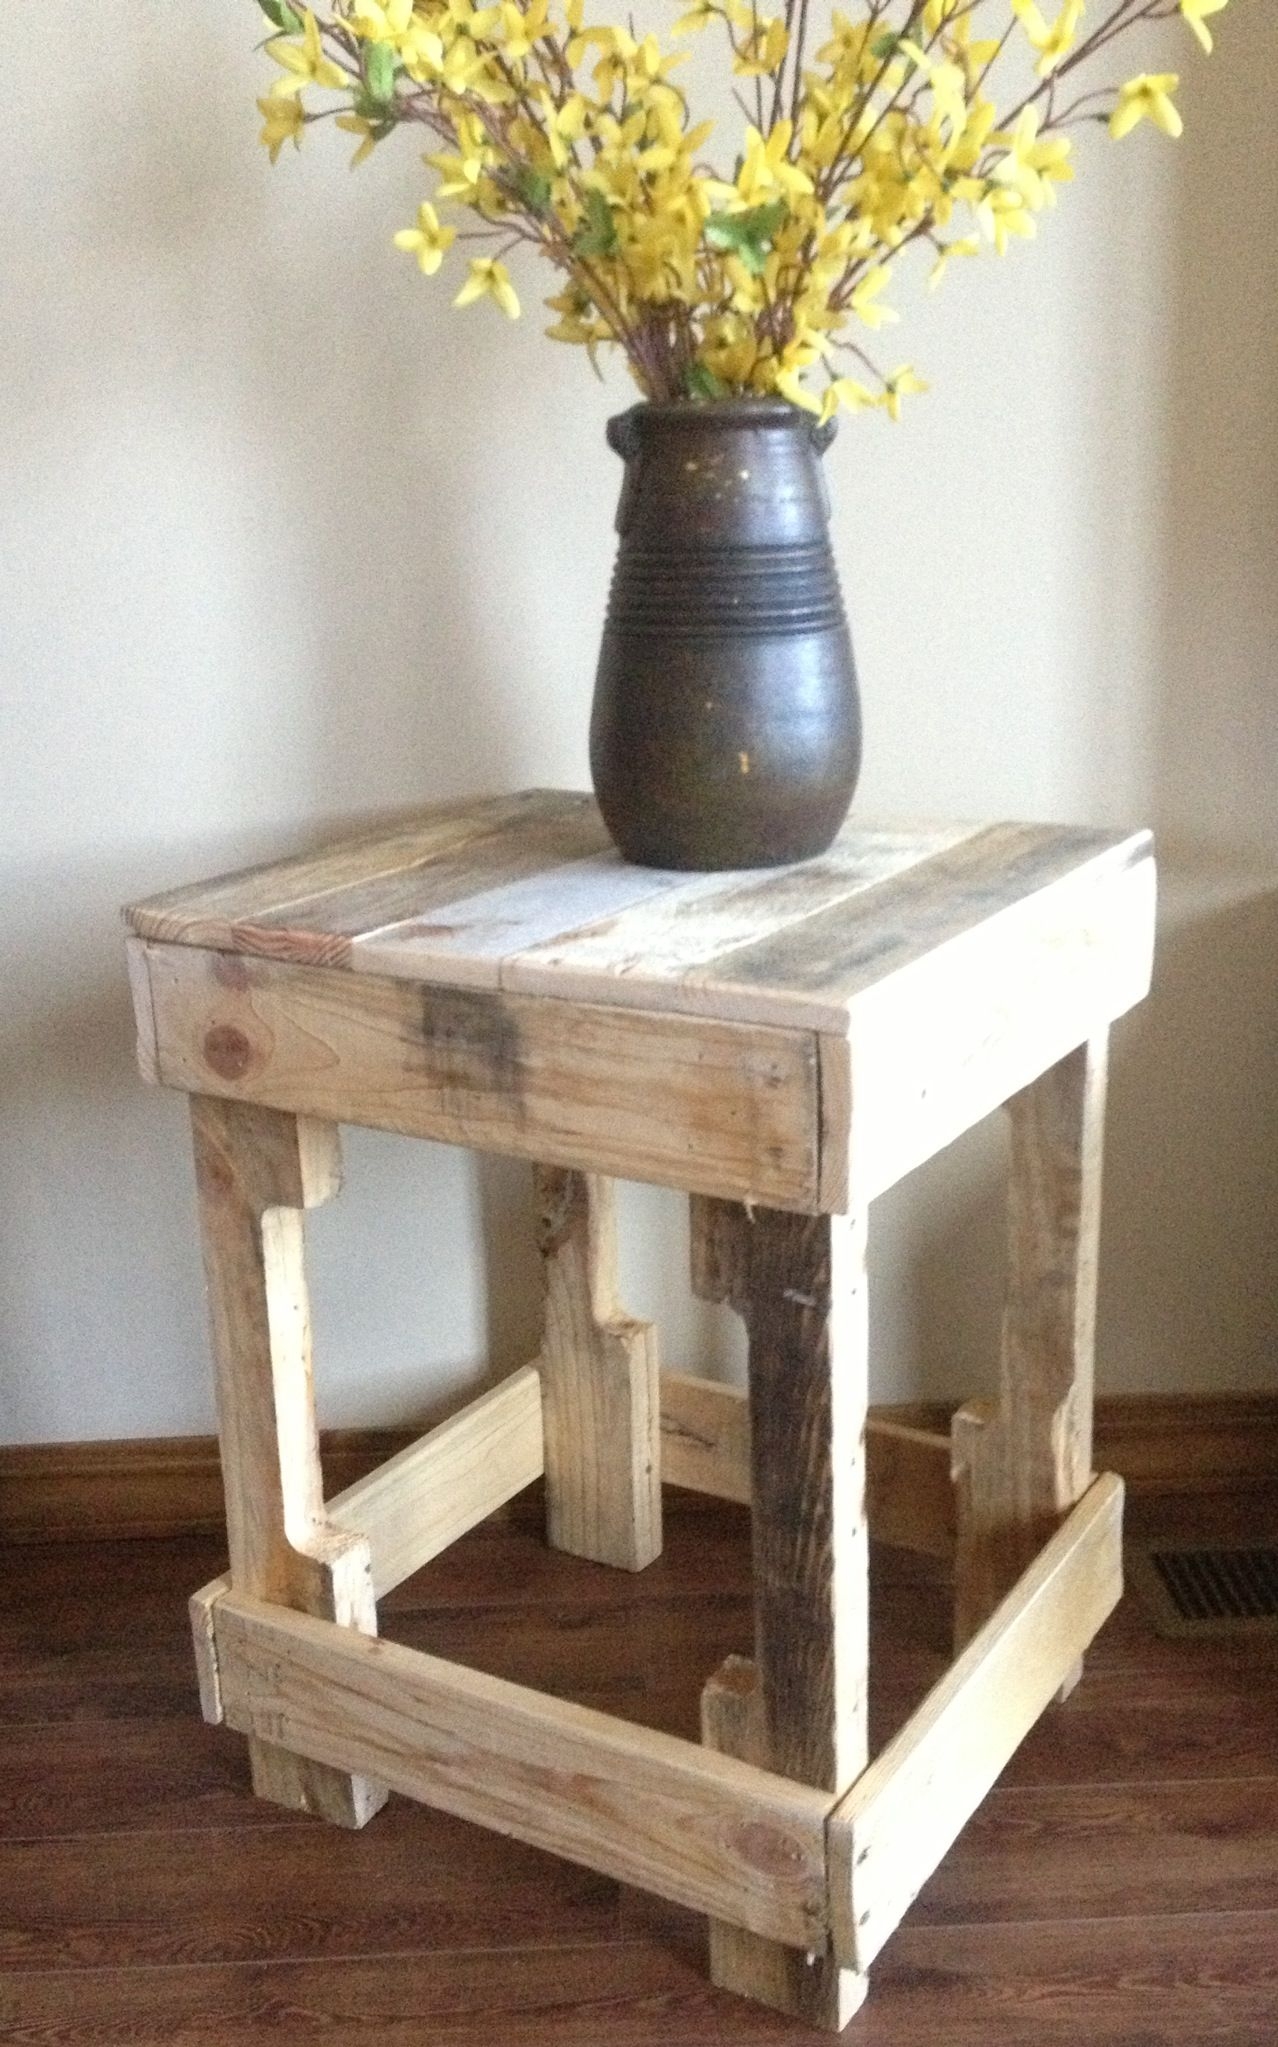 Crate end table